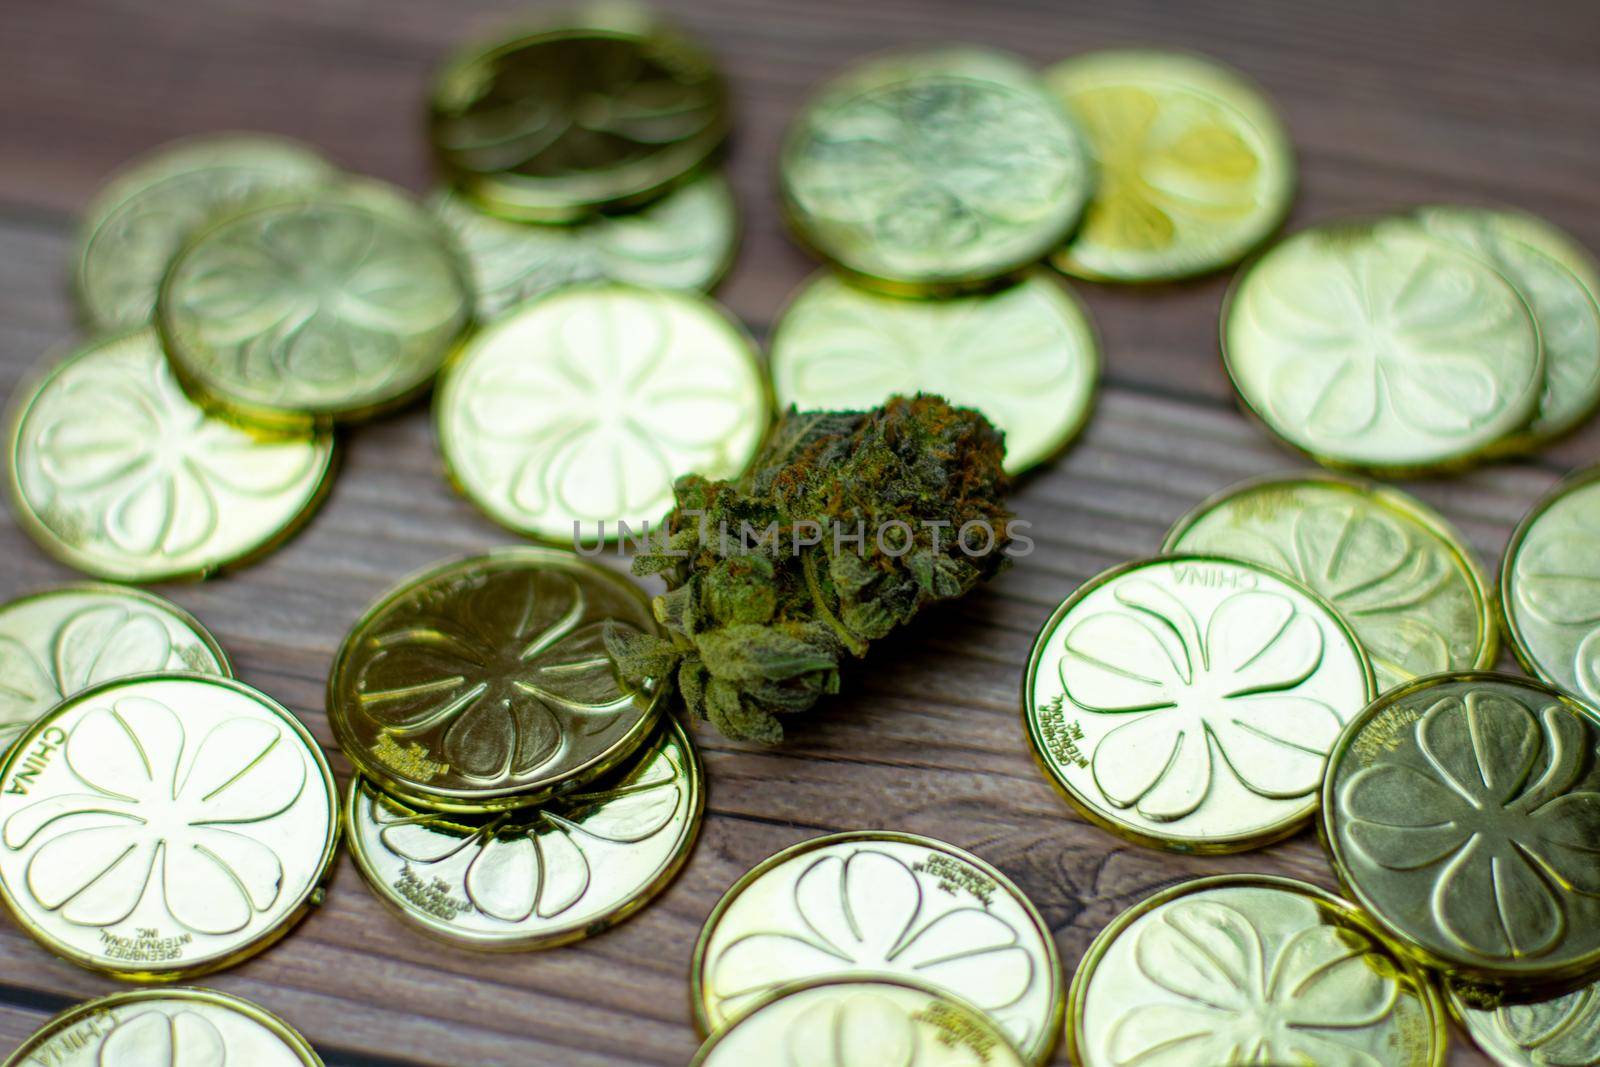 A Colorful Cannabis Nug Surrounded by a Pile of Gold Coins by bju12290